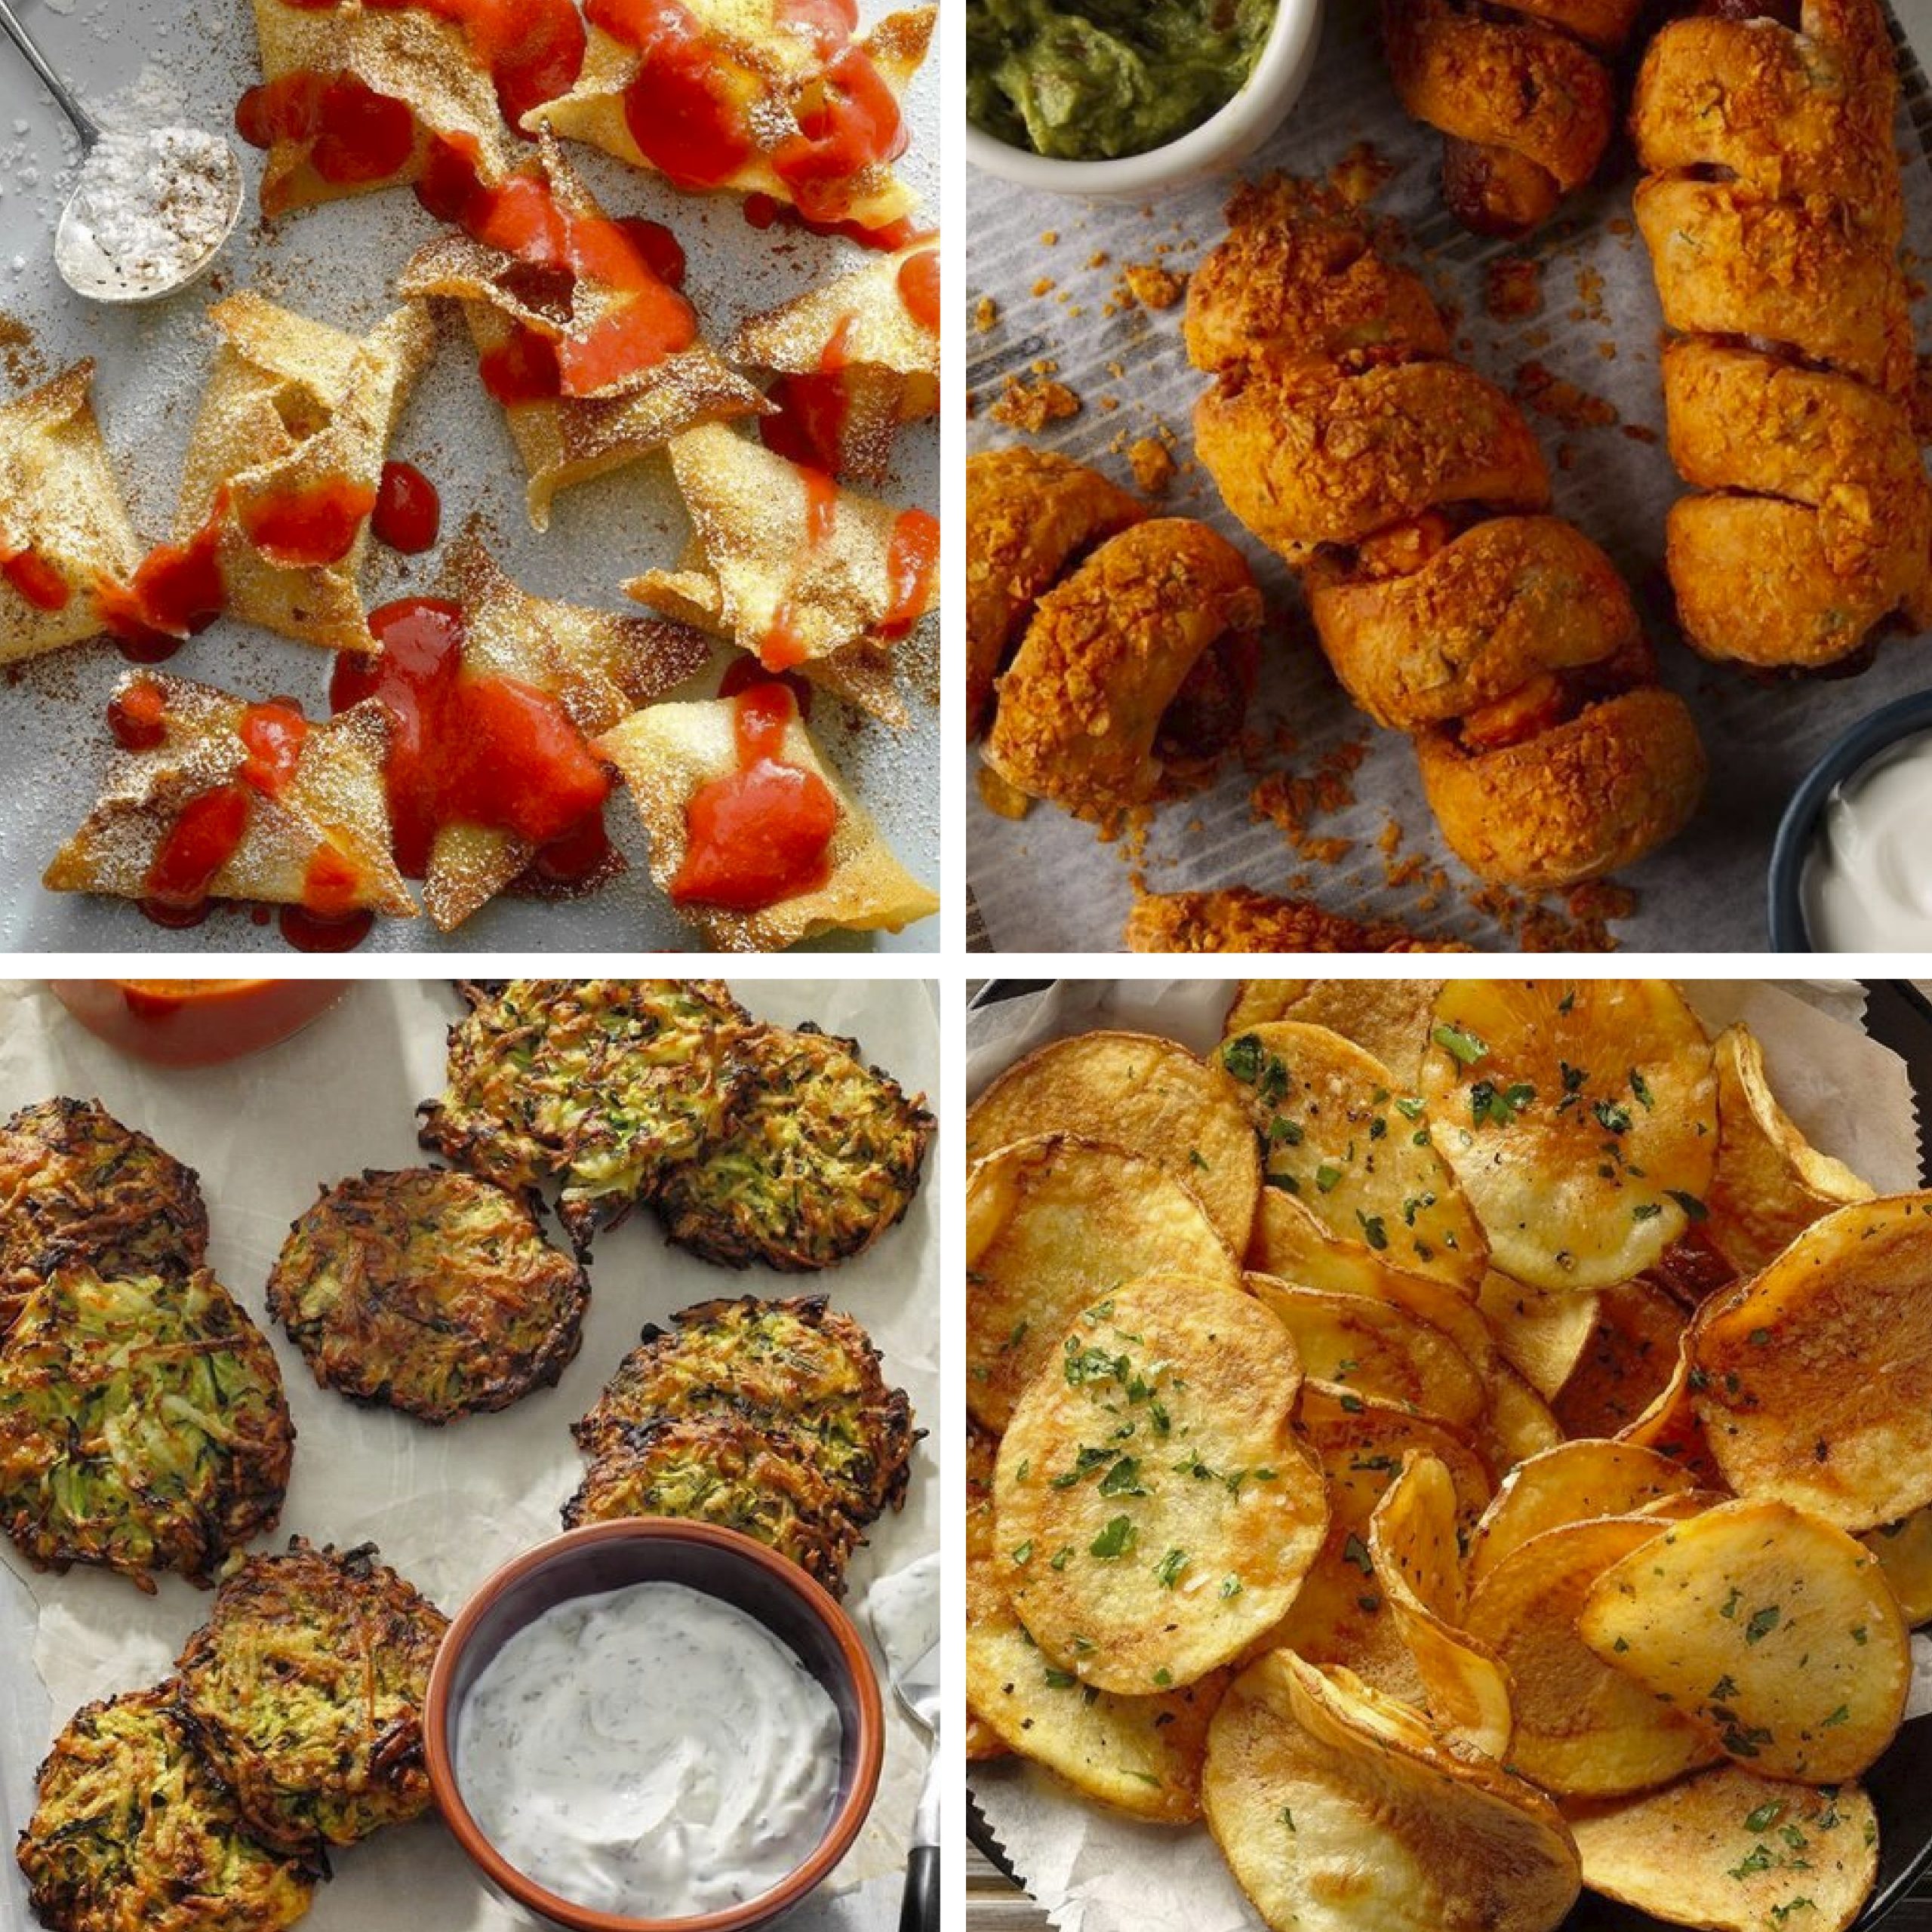 https://www.tasteofhome.com/wp-content/uploads/2022/01/14-Quick-and-Healthy-Air-Fryer-Appetizers-to-Kick-Off-the-Super-Bowl-scaled.jpg